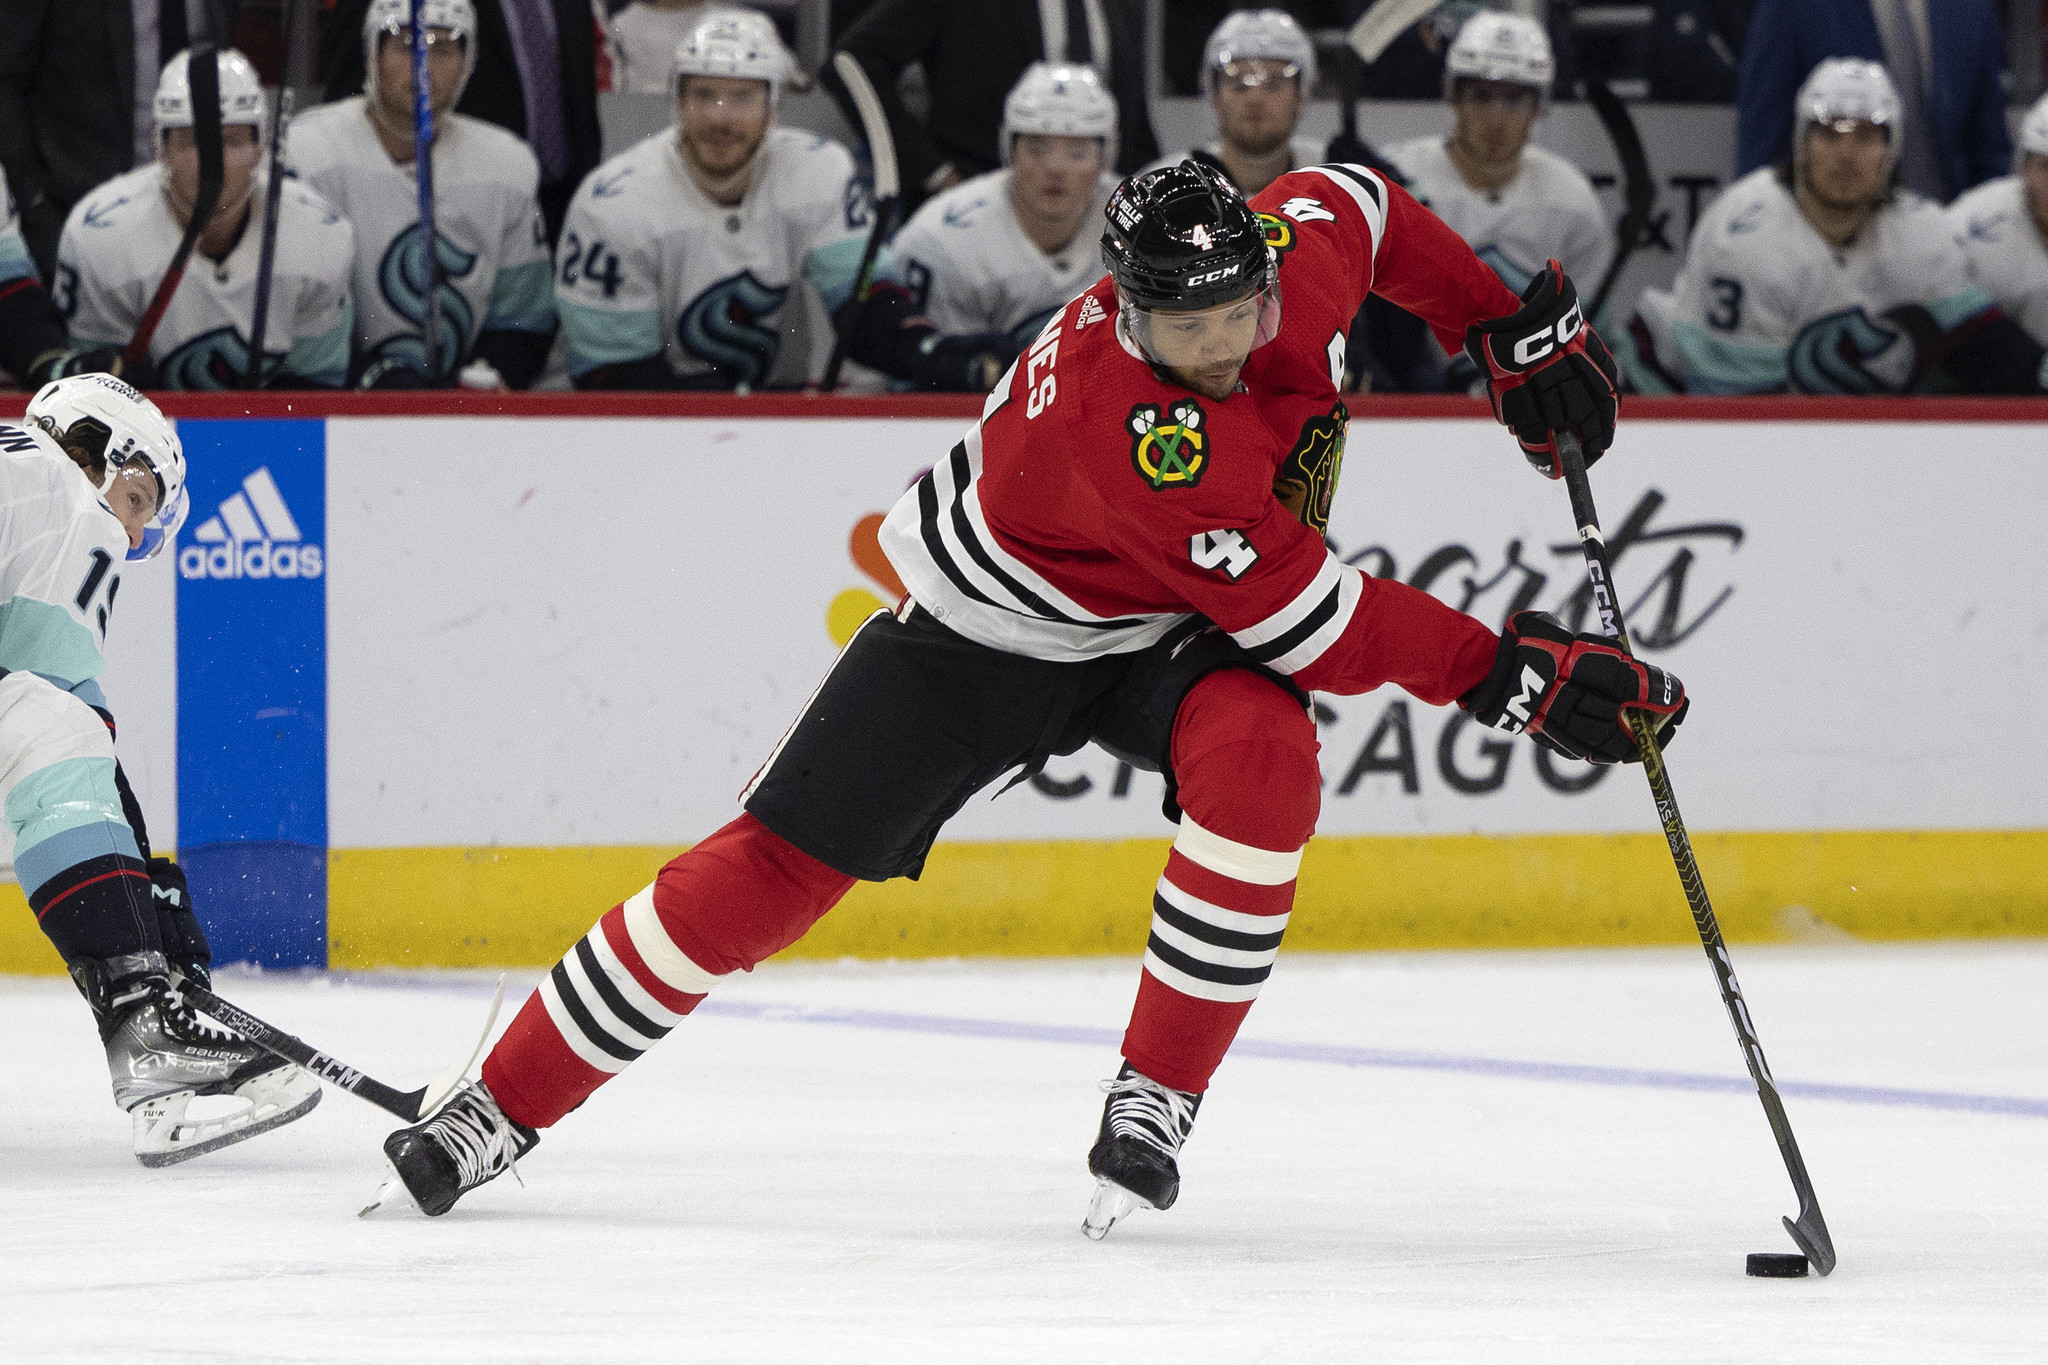 Blackhawks fans will have to get used to Seth Jones as lone NHL All-Star